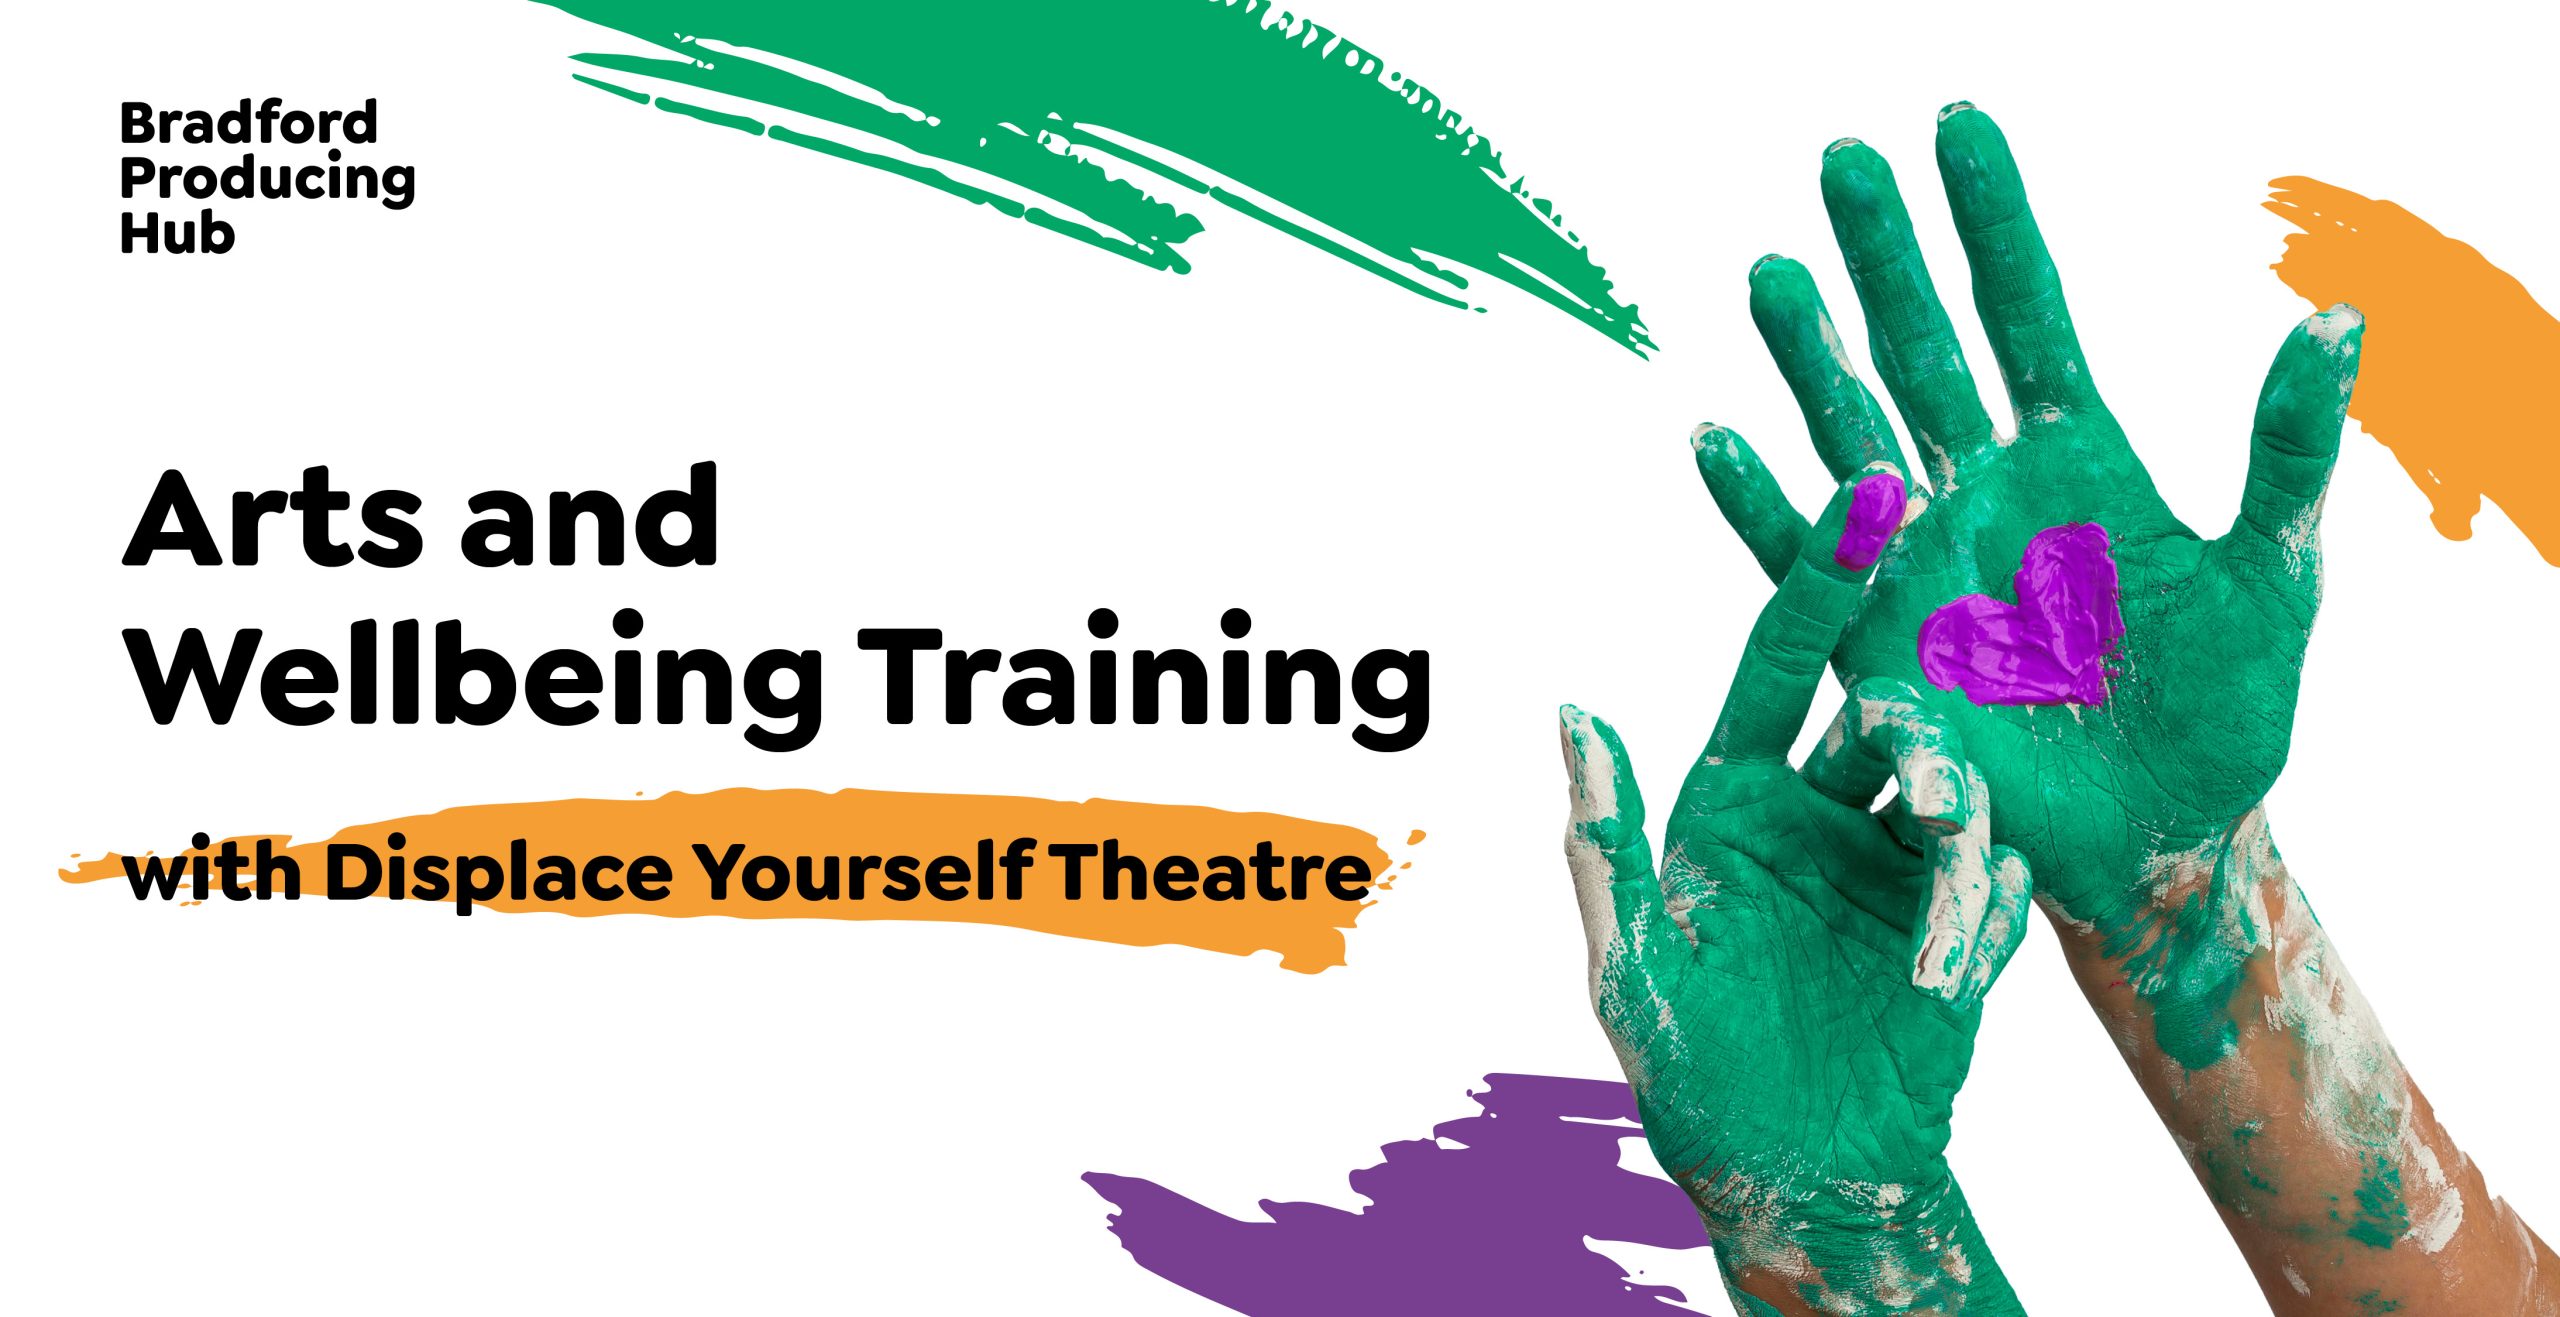 Arts and Wellbeing Training with Displace Yourself Theatre